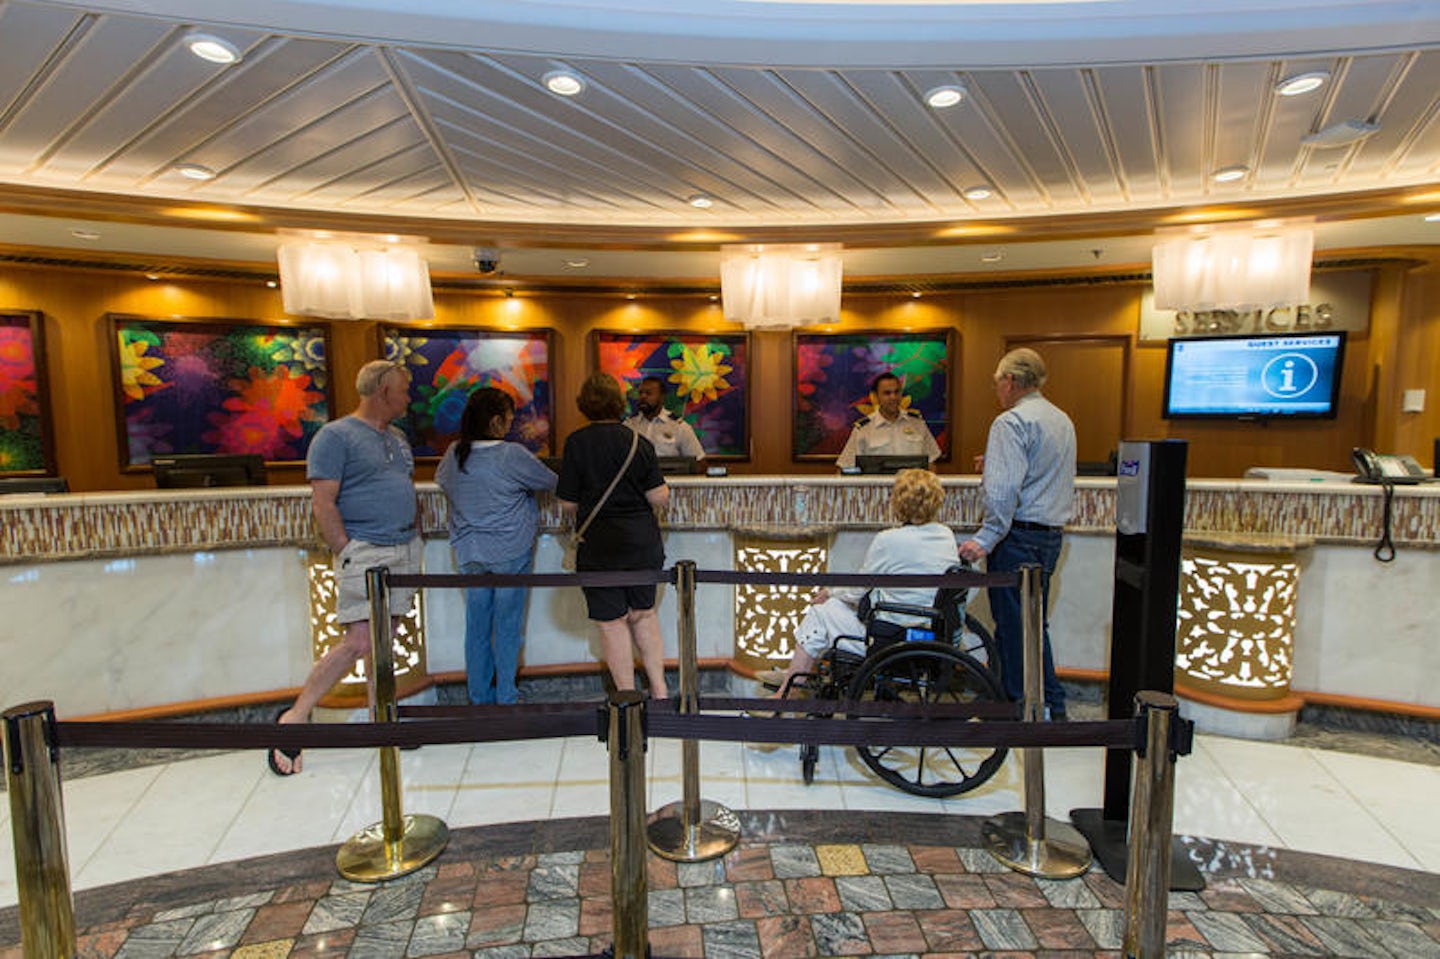 Guest Services on Liberty of the Seas